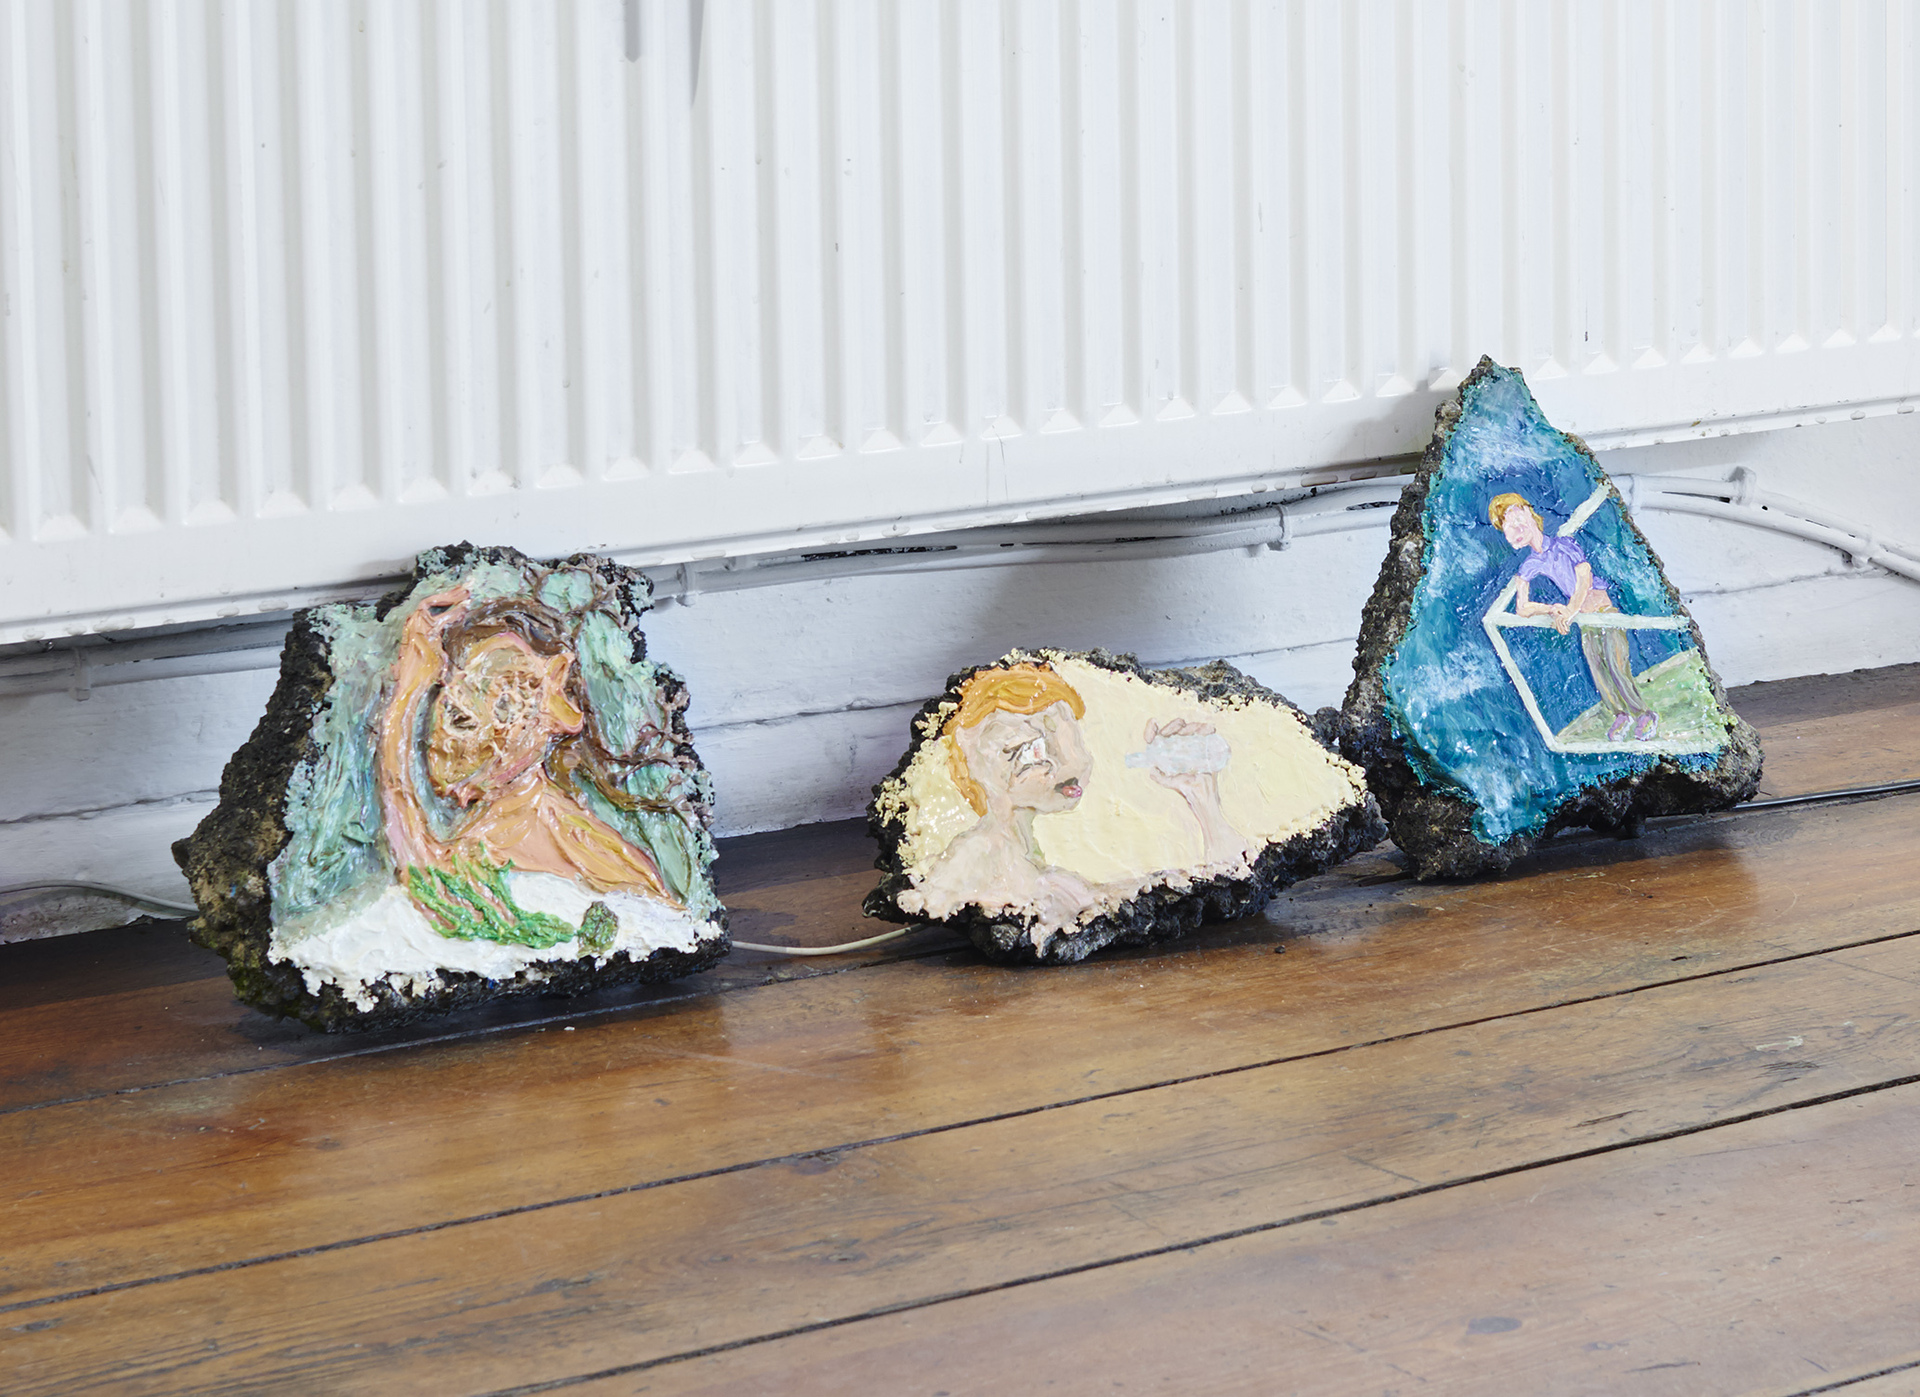 Nico Lillo, the garden of delays, 2020, oil on rocks, 3 objects: 30 cm x 20 cm x 10 cm approx each